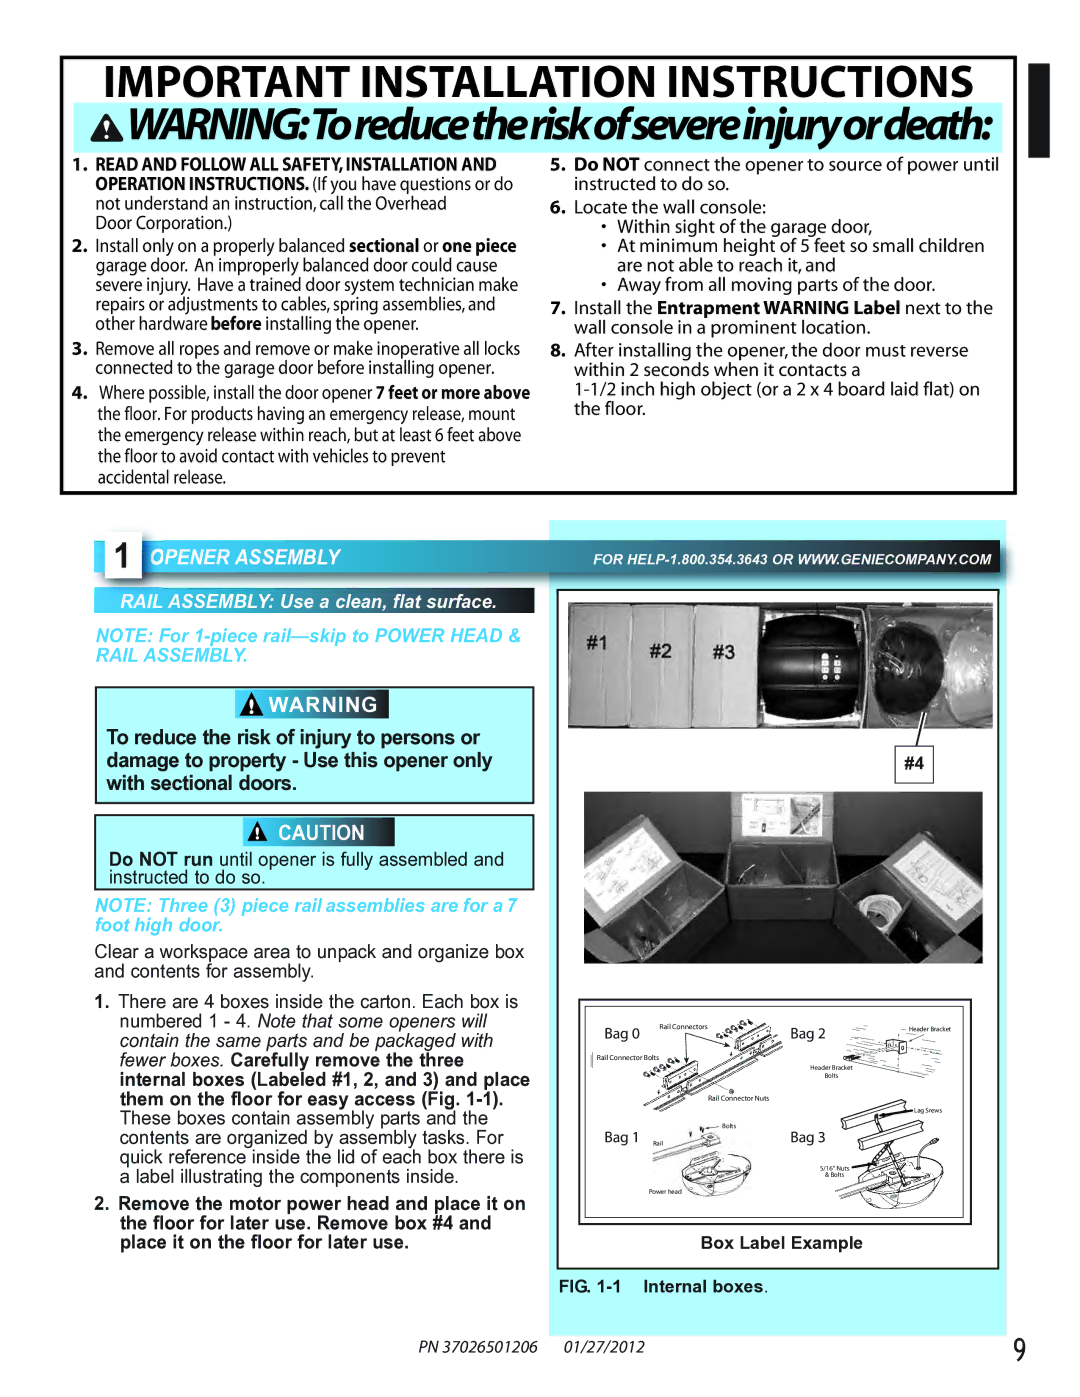 Genie 2042, 2022, 2024 manual Important Installation Instructions, Pener Assembly 